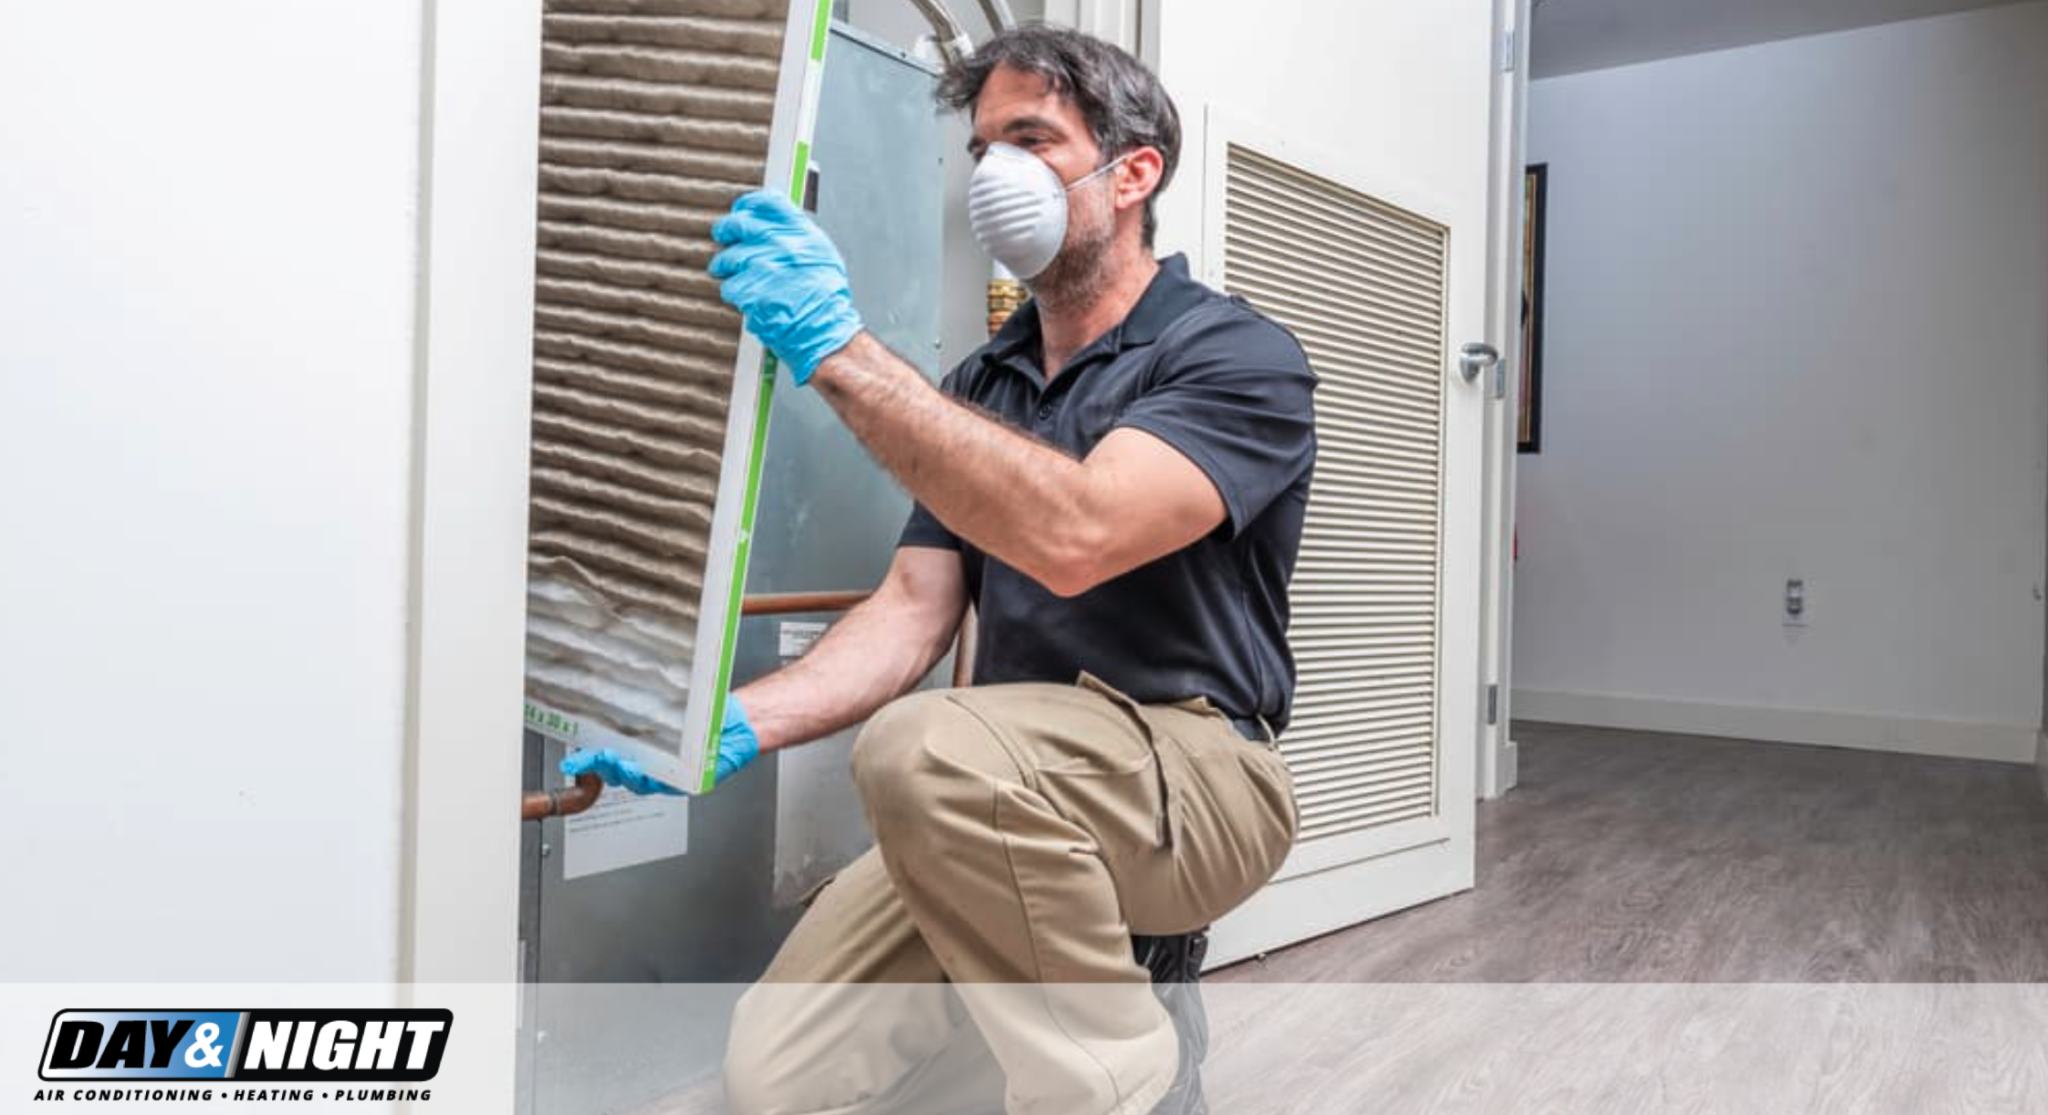 Indoor Air Quality Day & Night Cleaning Air Filter